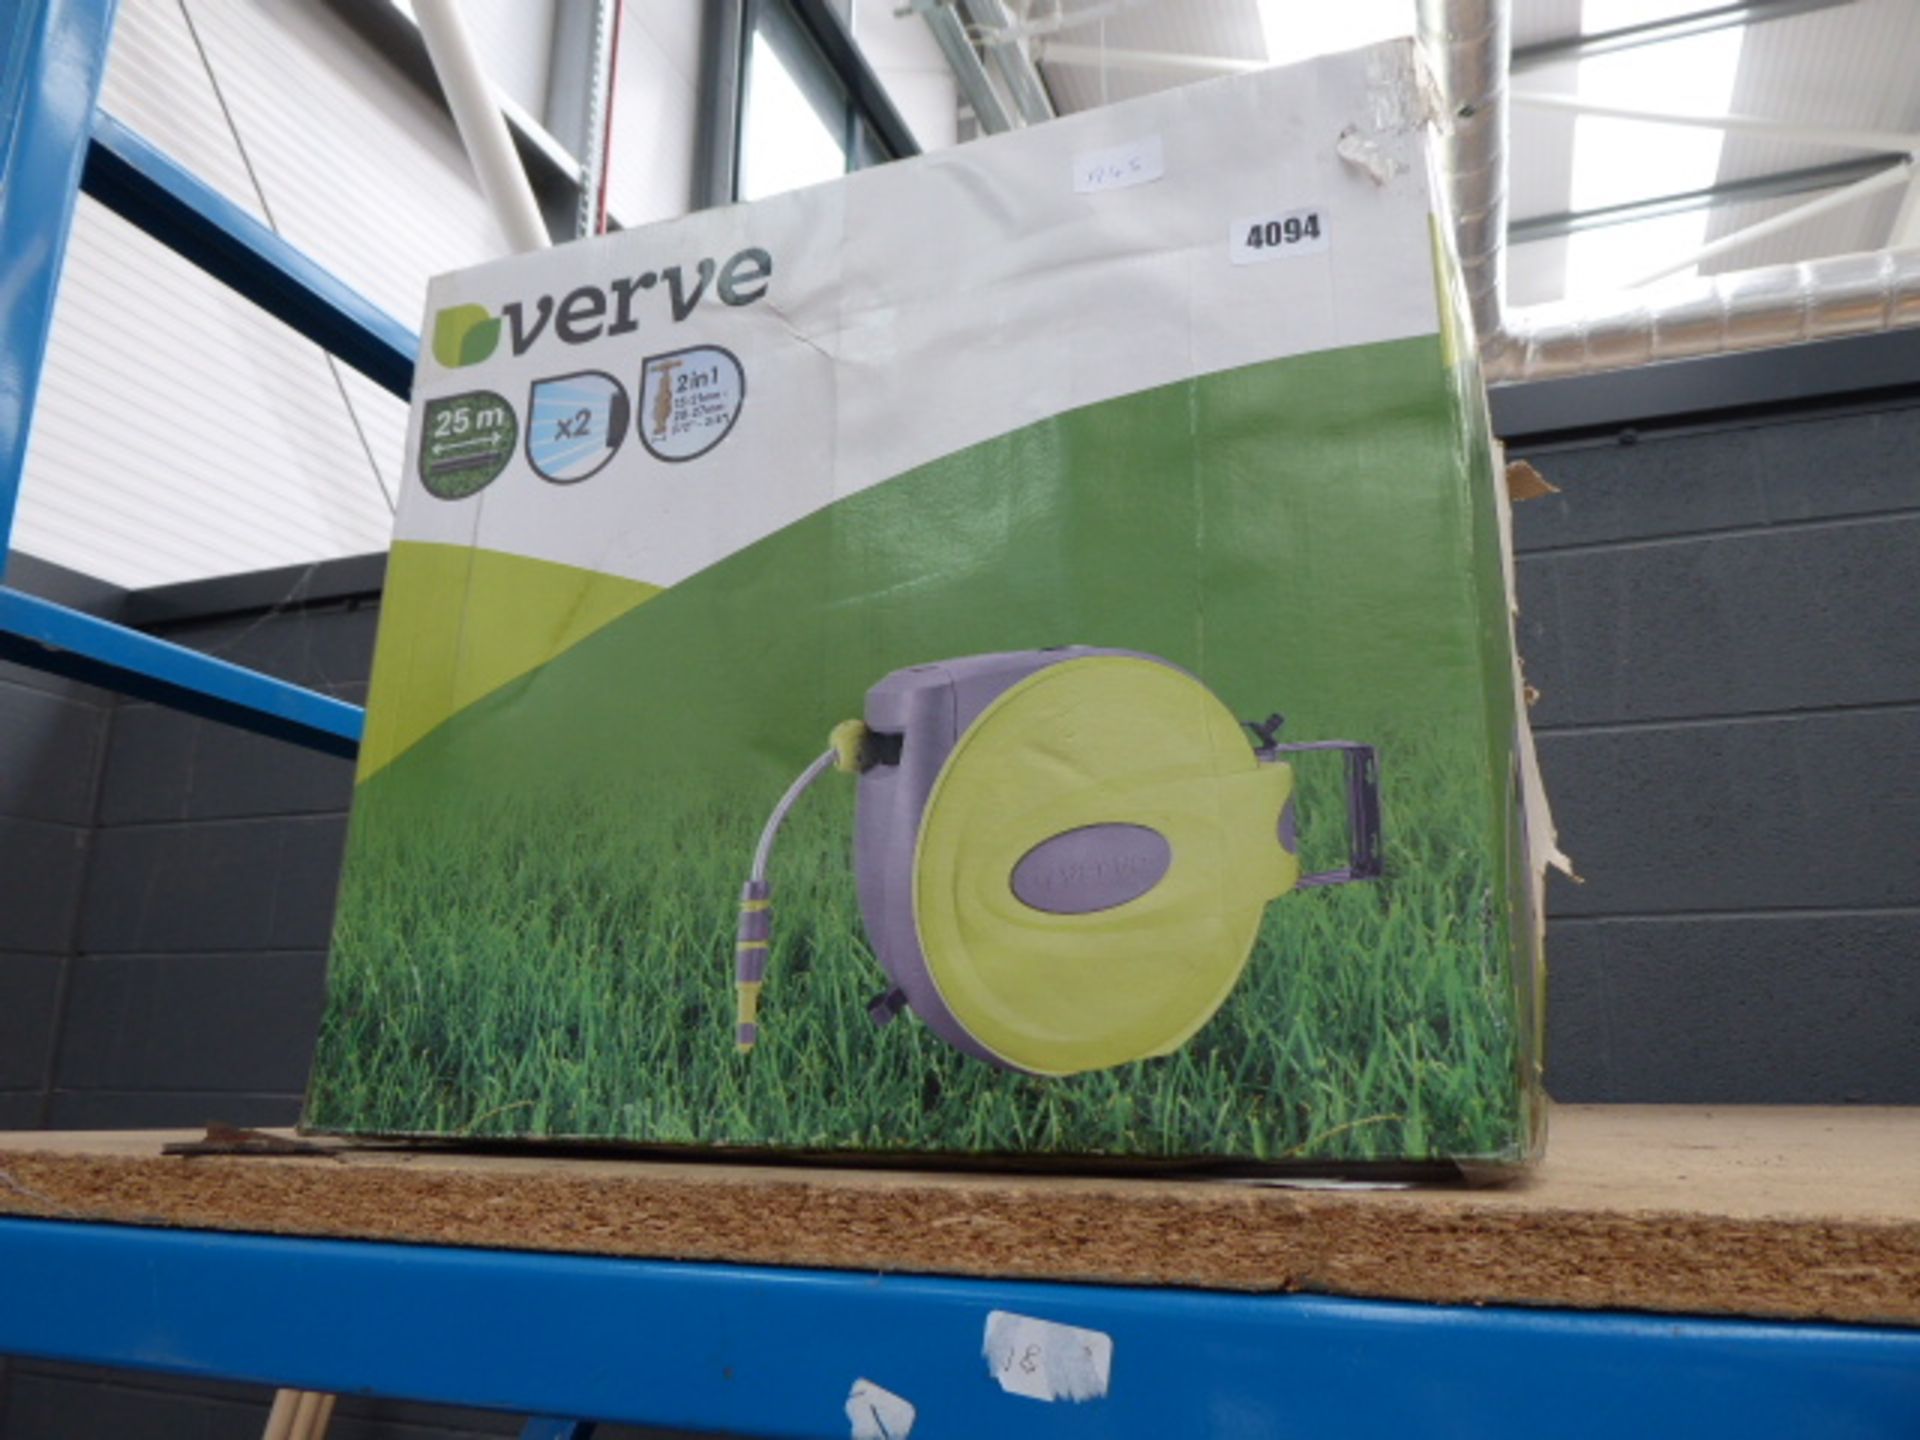 Verve boxed hose pipe and hose